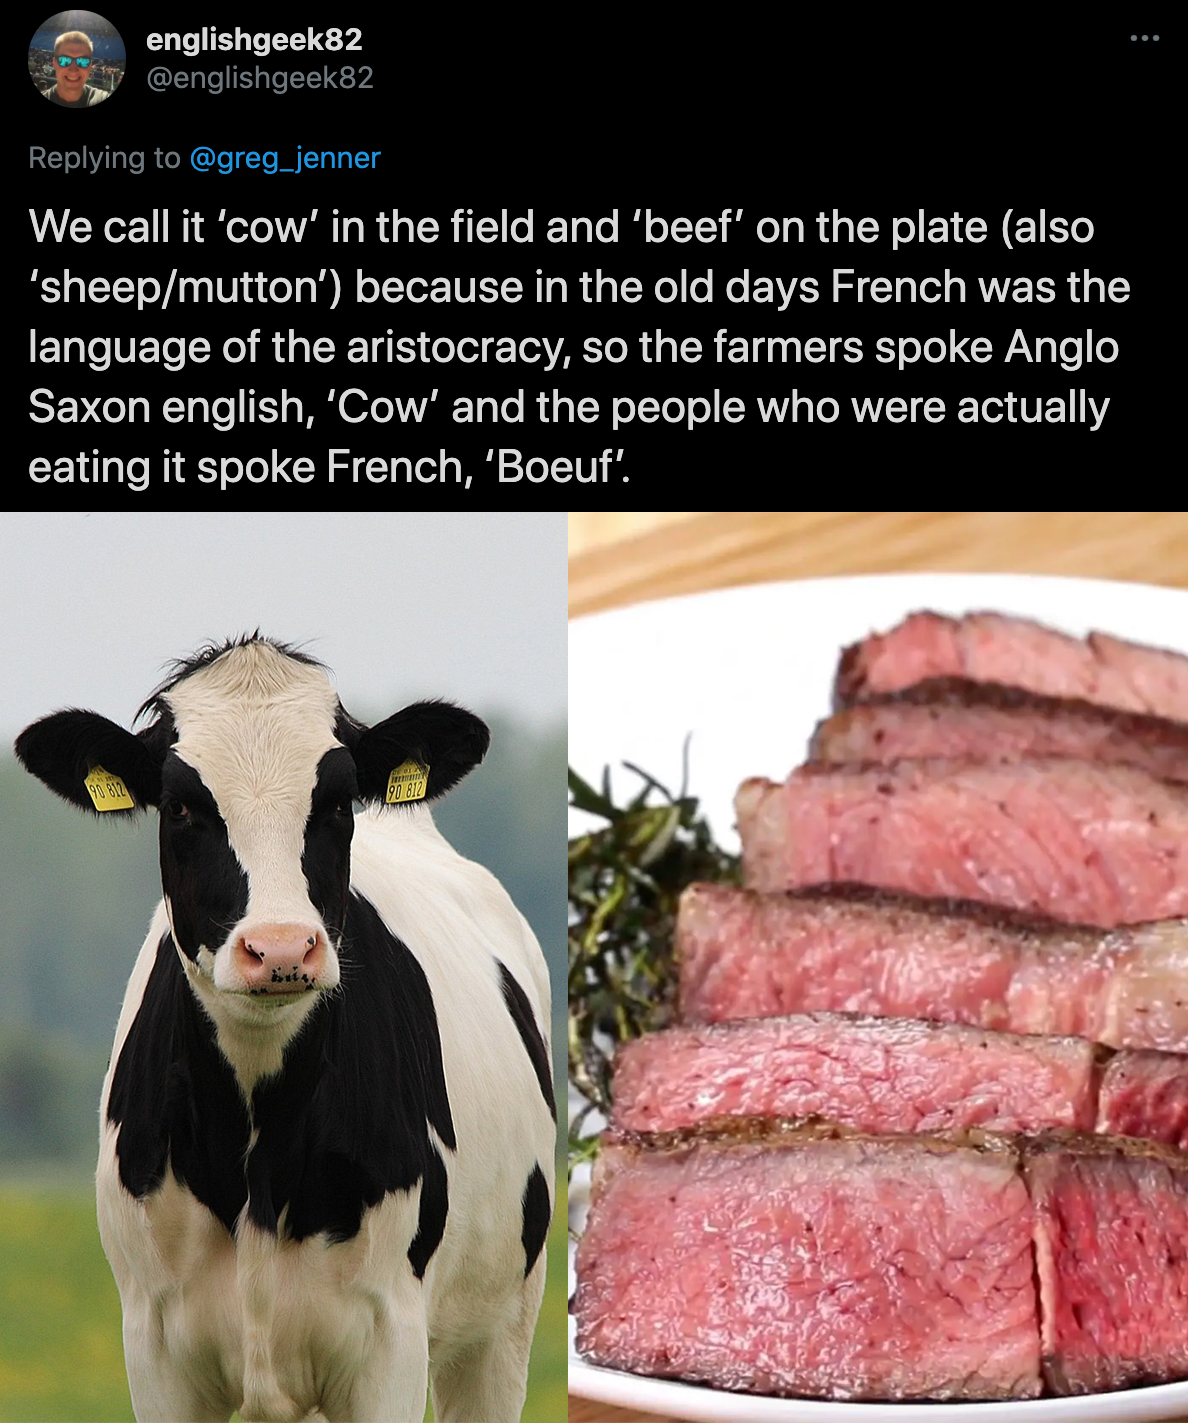 cool facts - We call it 'cow' in the field and 'beef' on the plate